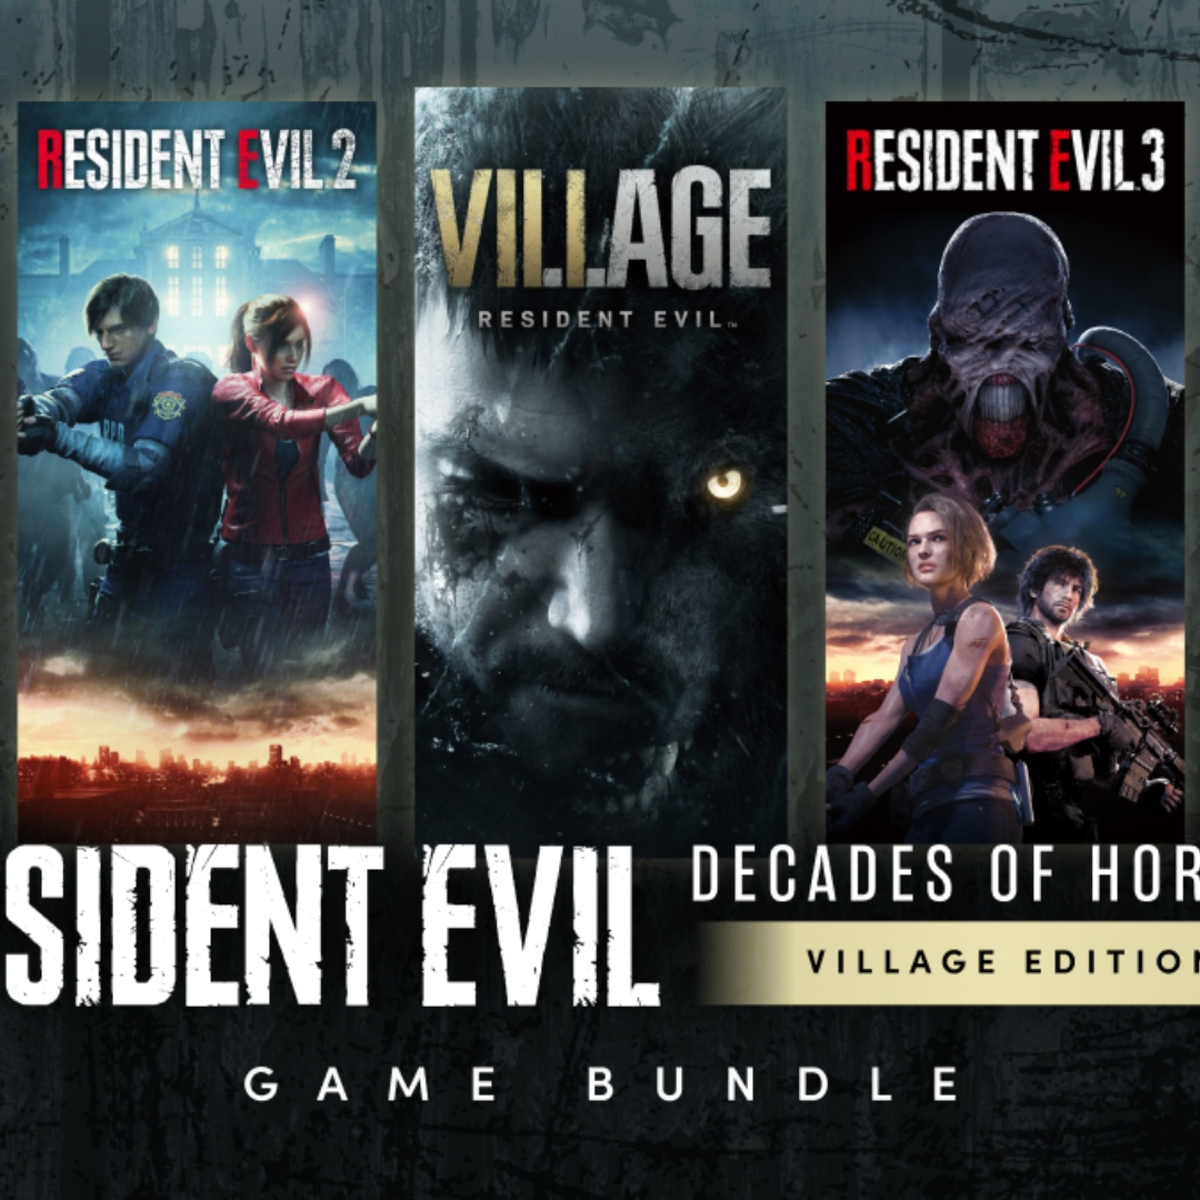 This incredible Resident Evil Humble Bundle is a steal for just